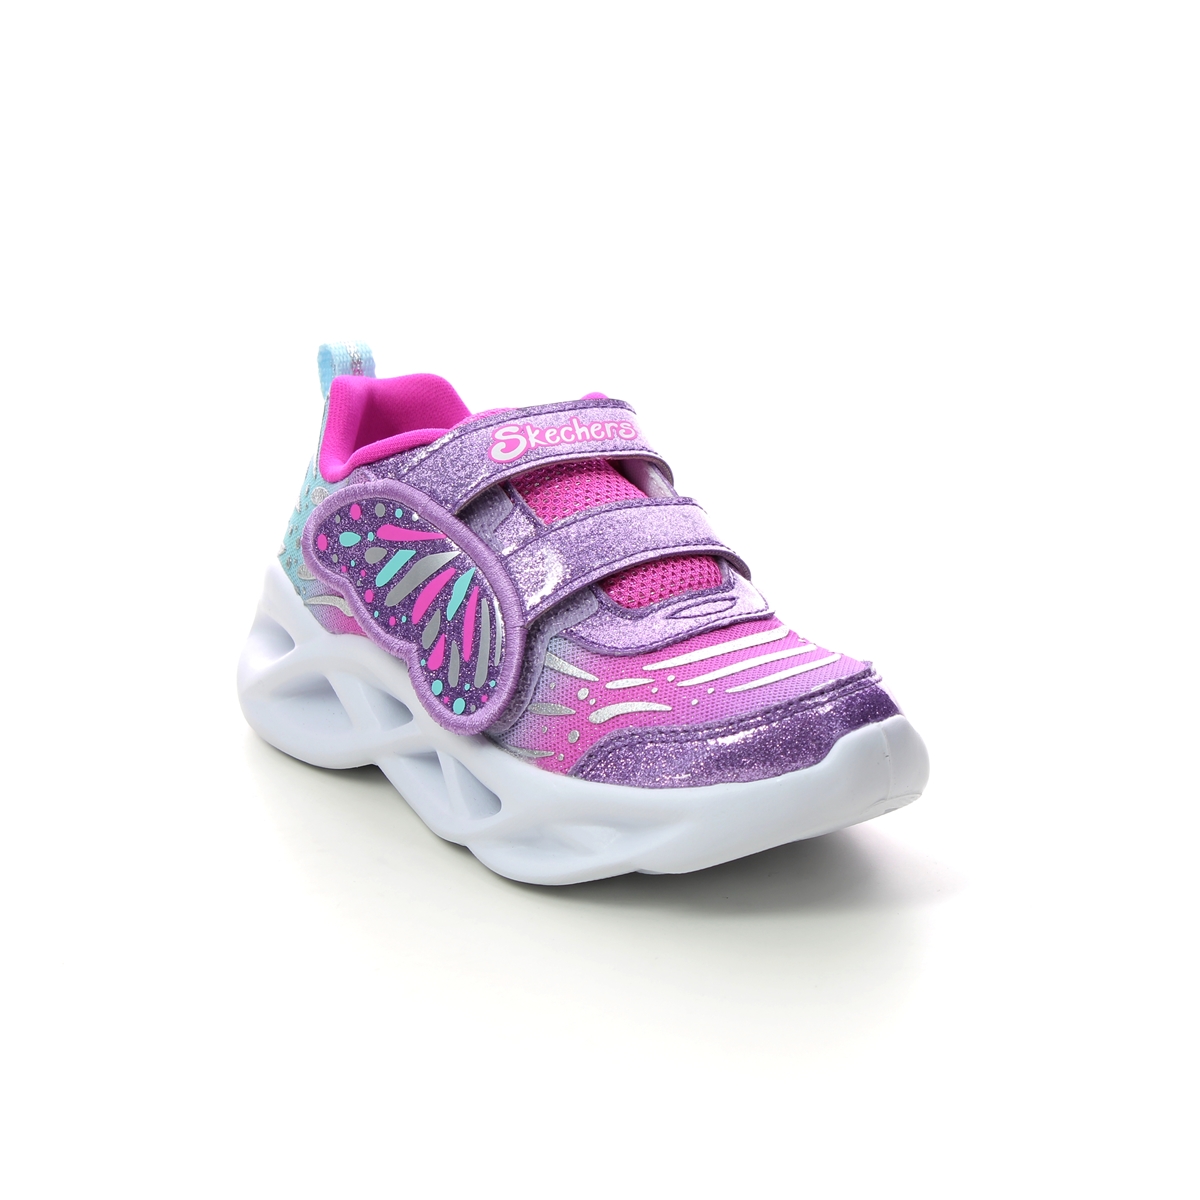 Skechers Twisty Brights Pink Kids Girls Trainers 302754N In Size 26 In Plain Pink For kids